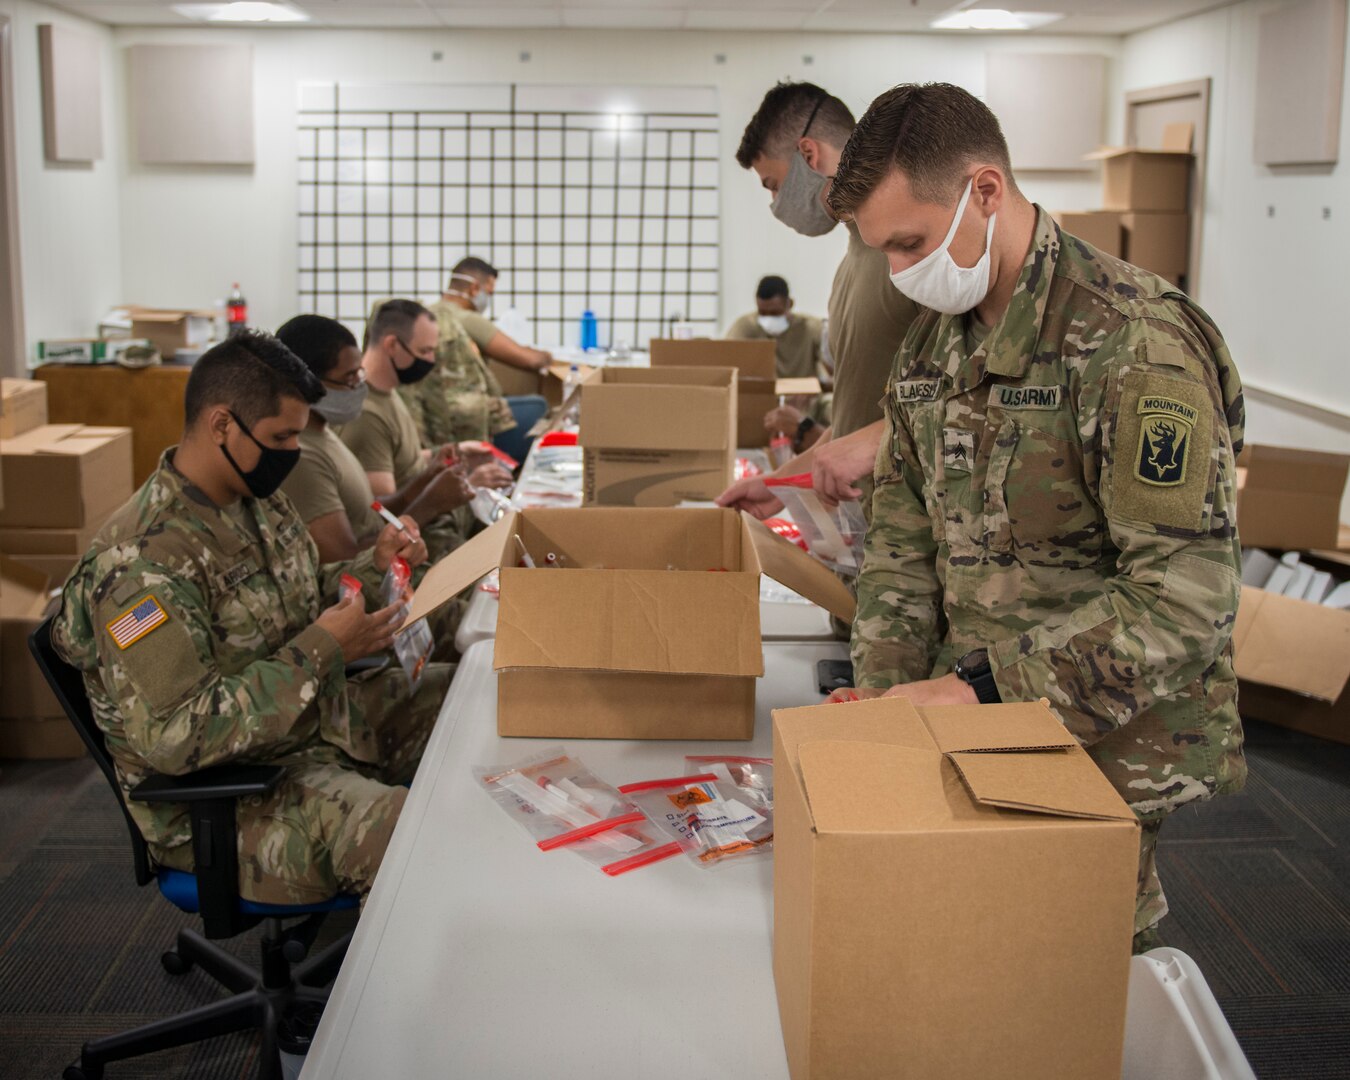 Soldiers from the 1-102nd Infantry Regiment assemble COVID-19 test kits at the Governor William A. O’Neill Hartford State Armory, Hartford, Connecticut, July 27, 2020.